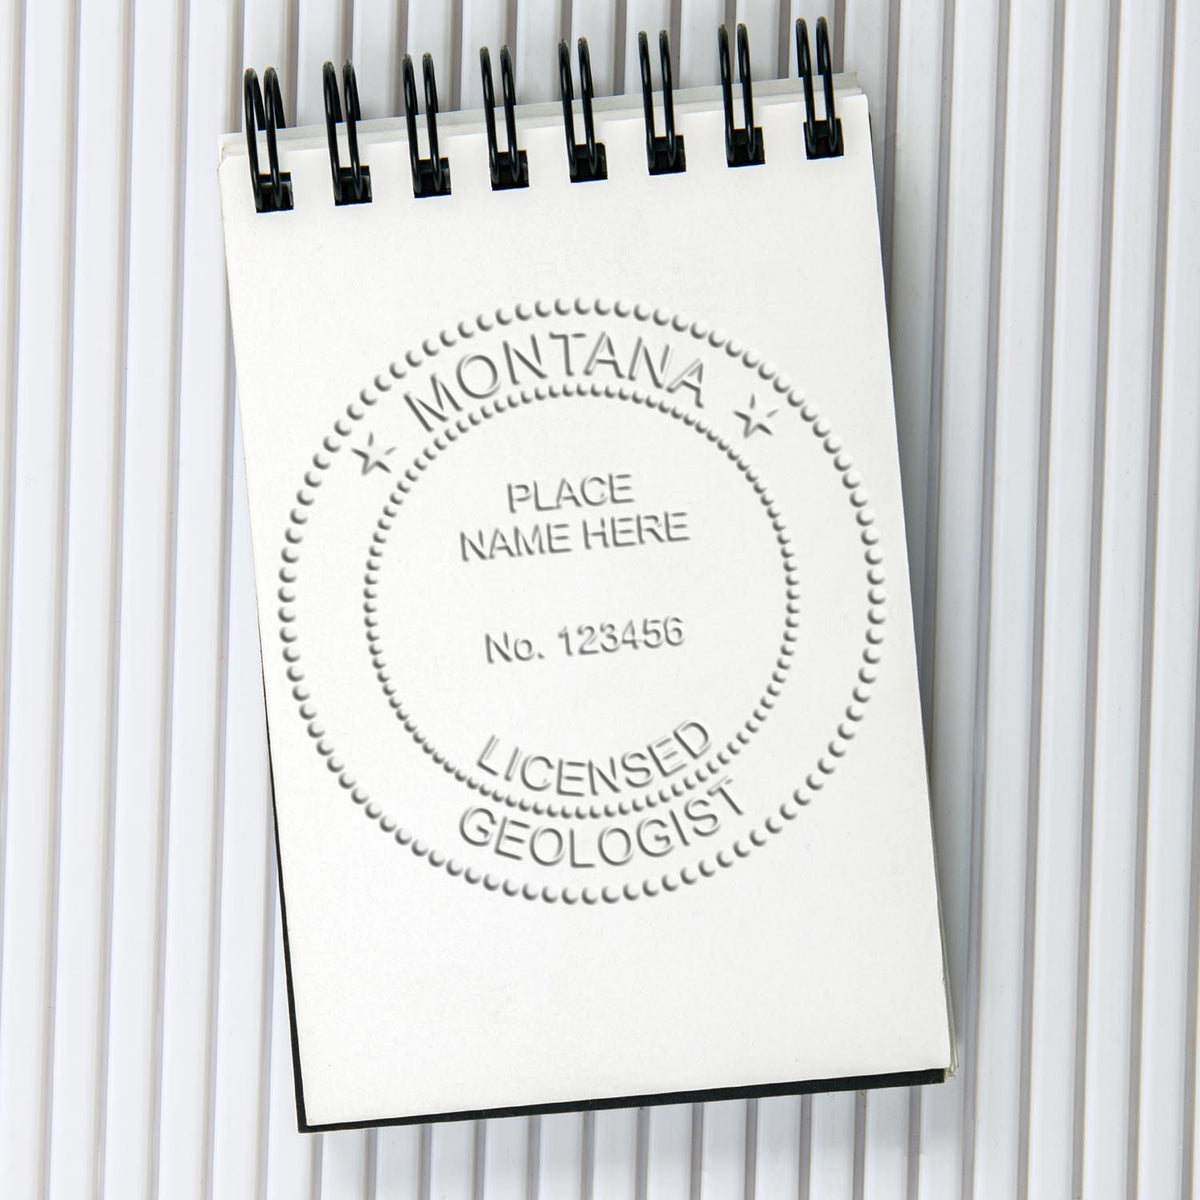 An in use photo of the Hybrid Montana Geologist Seal showing a sample imprint on a cardstock